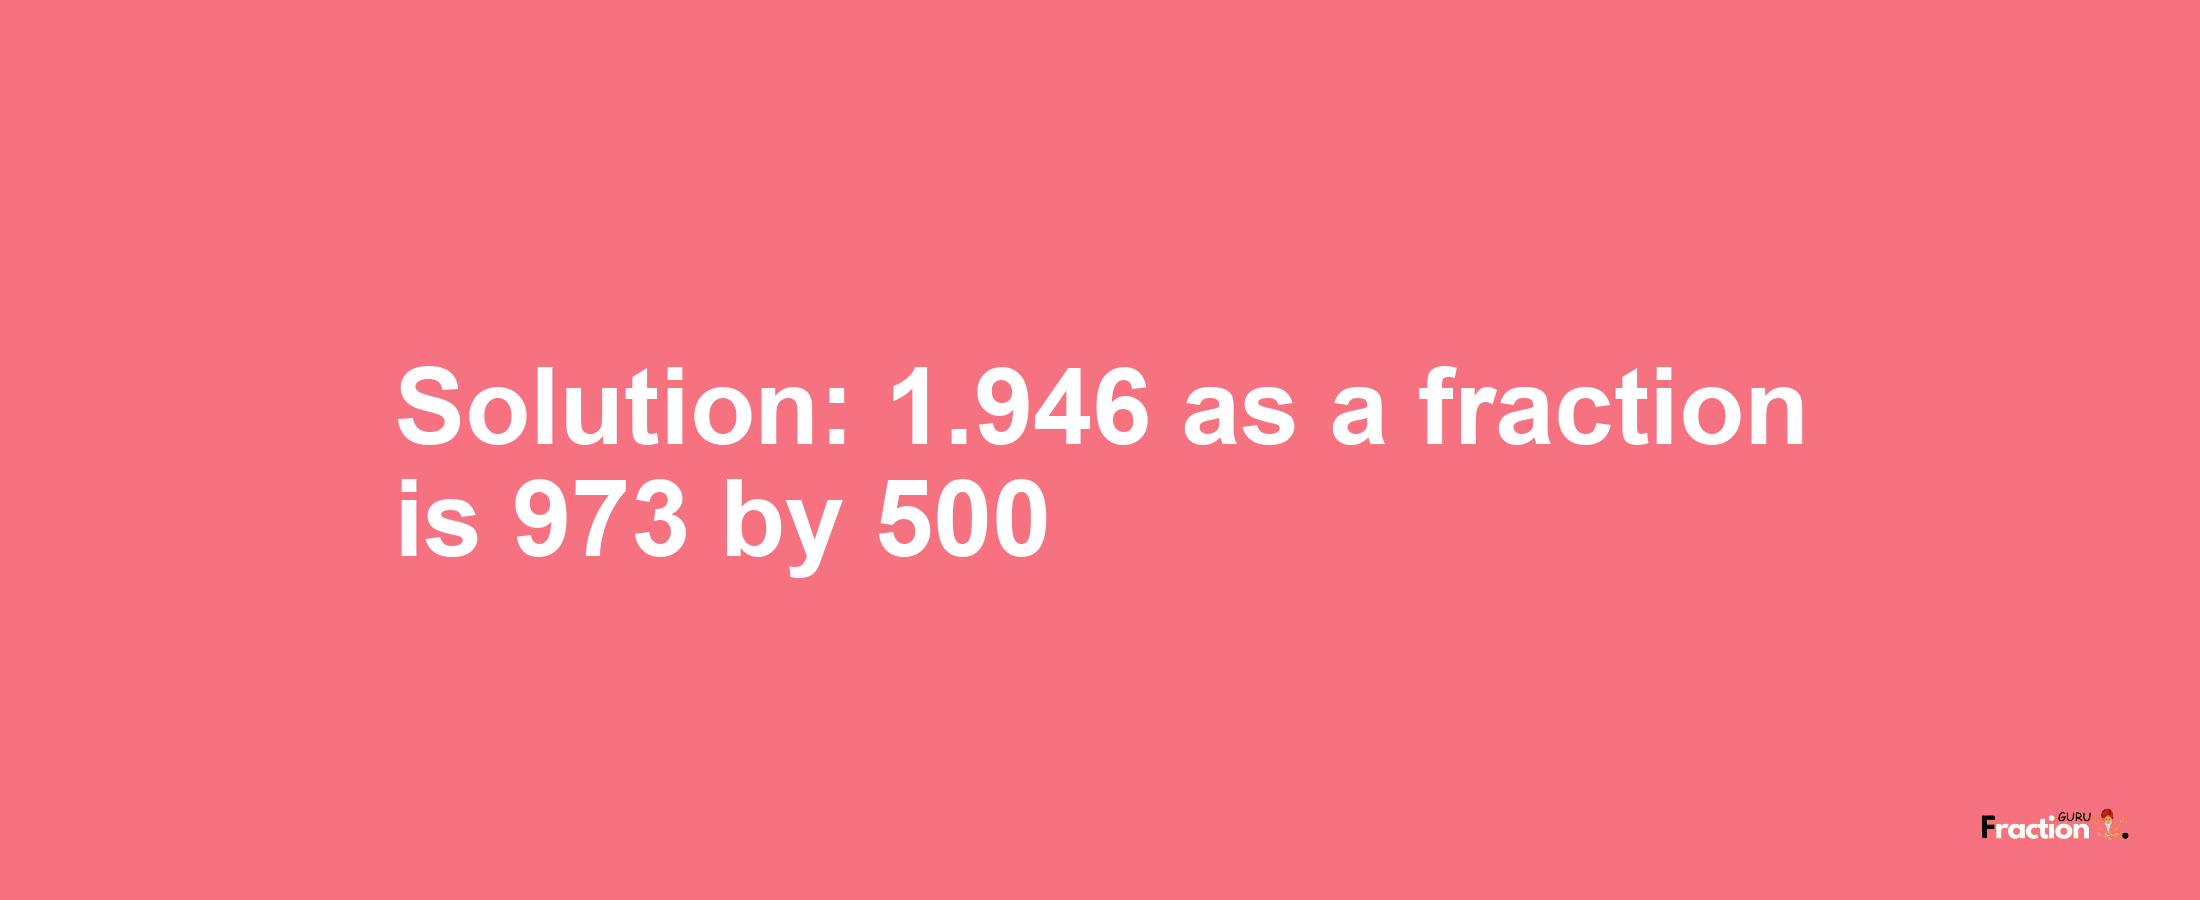 Solution:1.946 as a fraction is 973/500